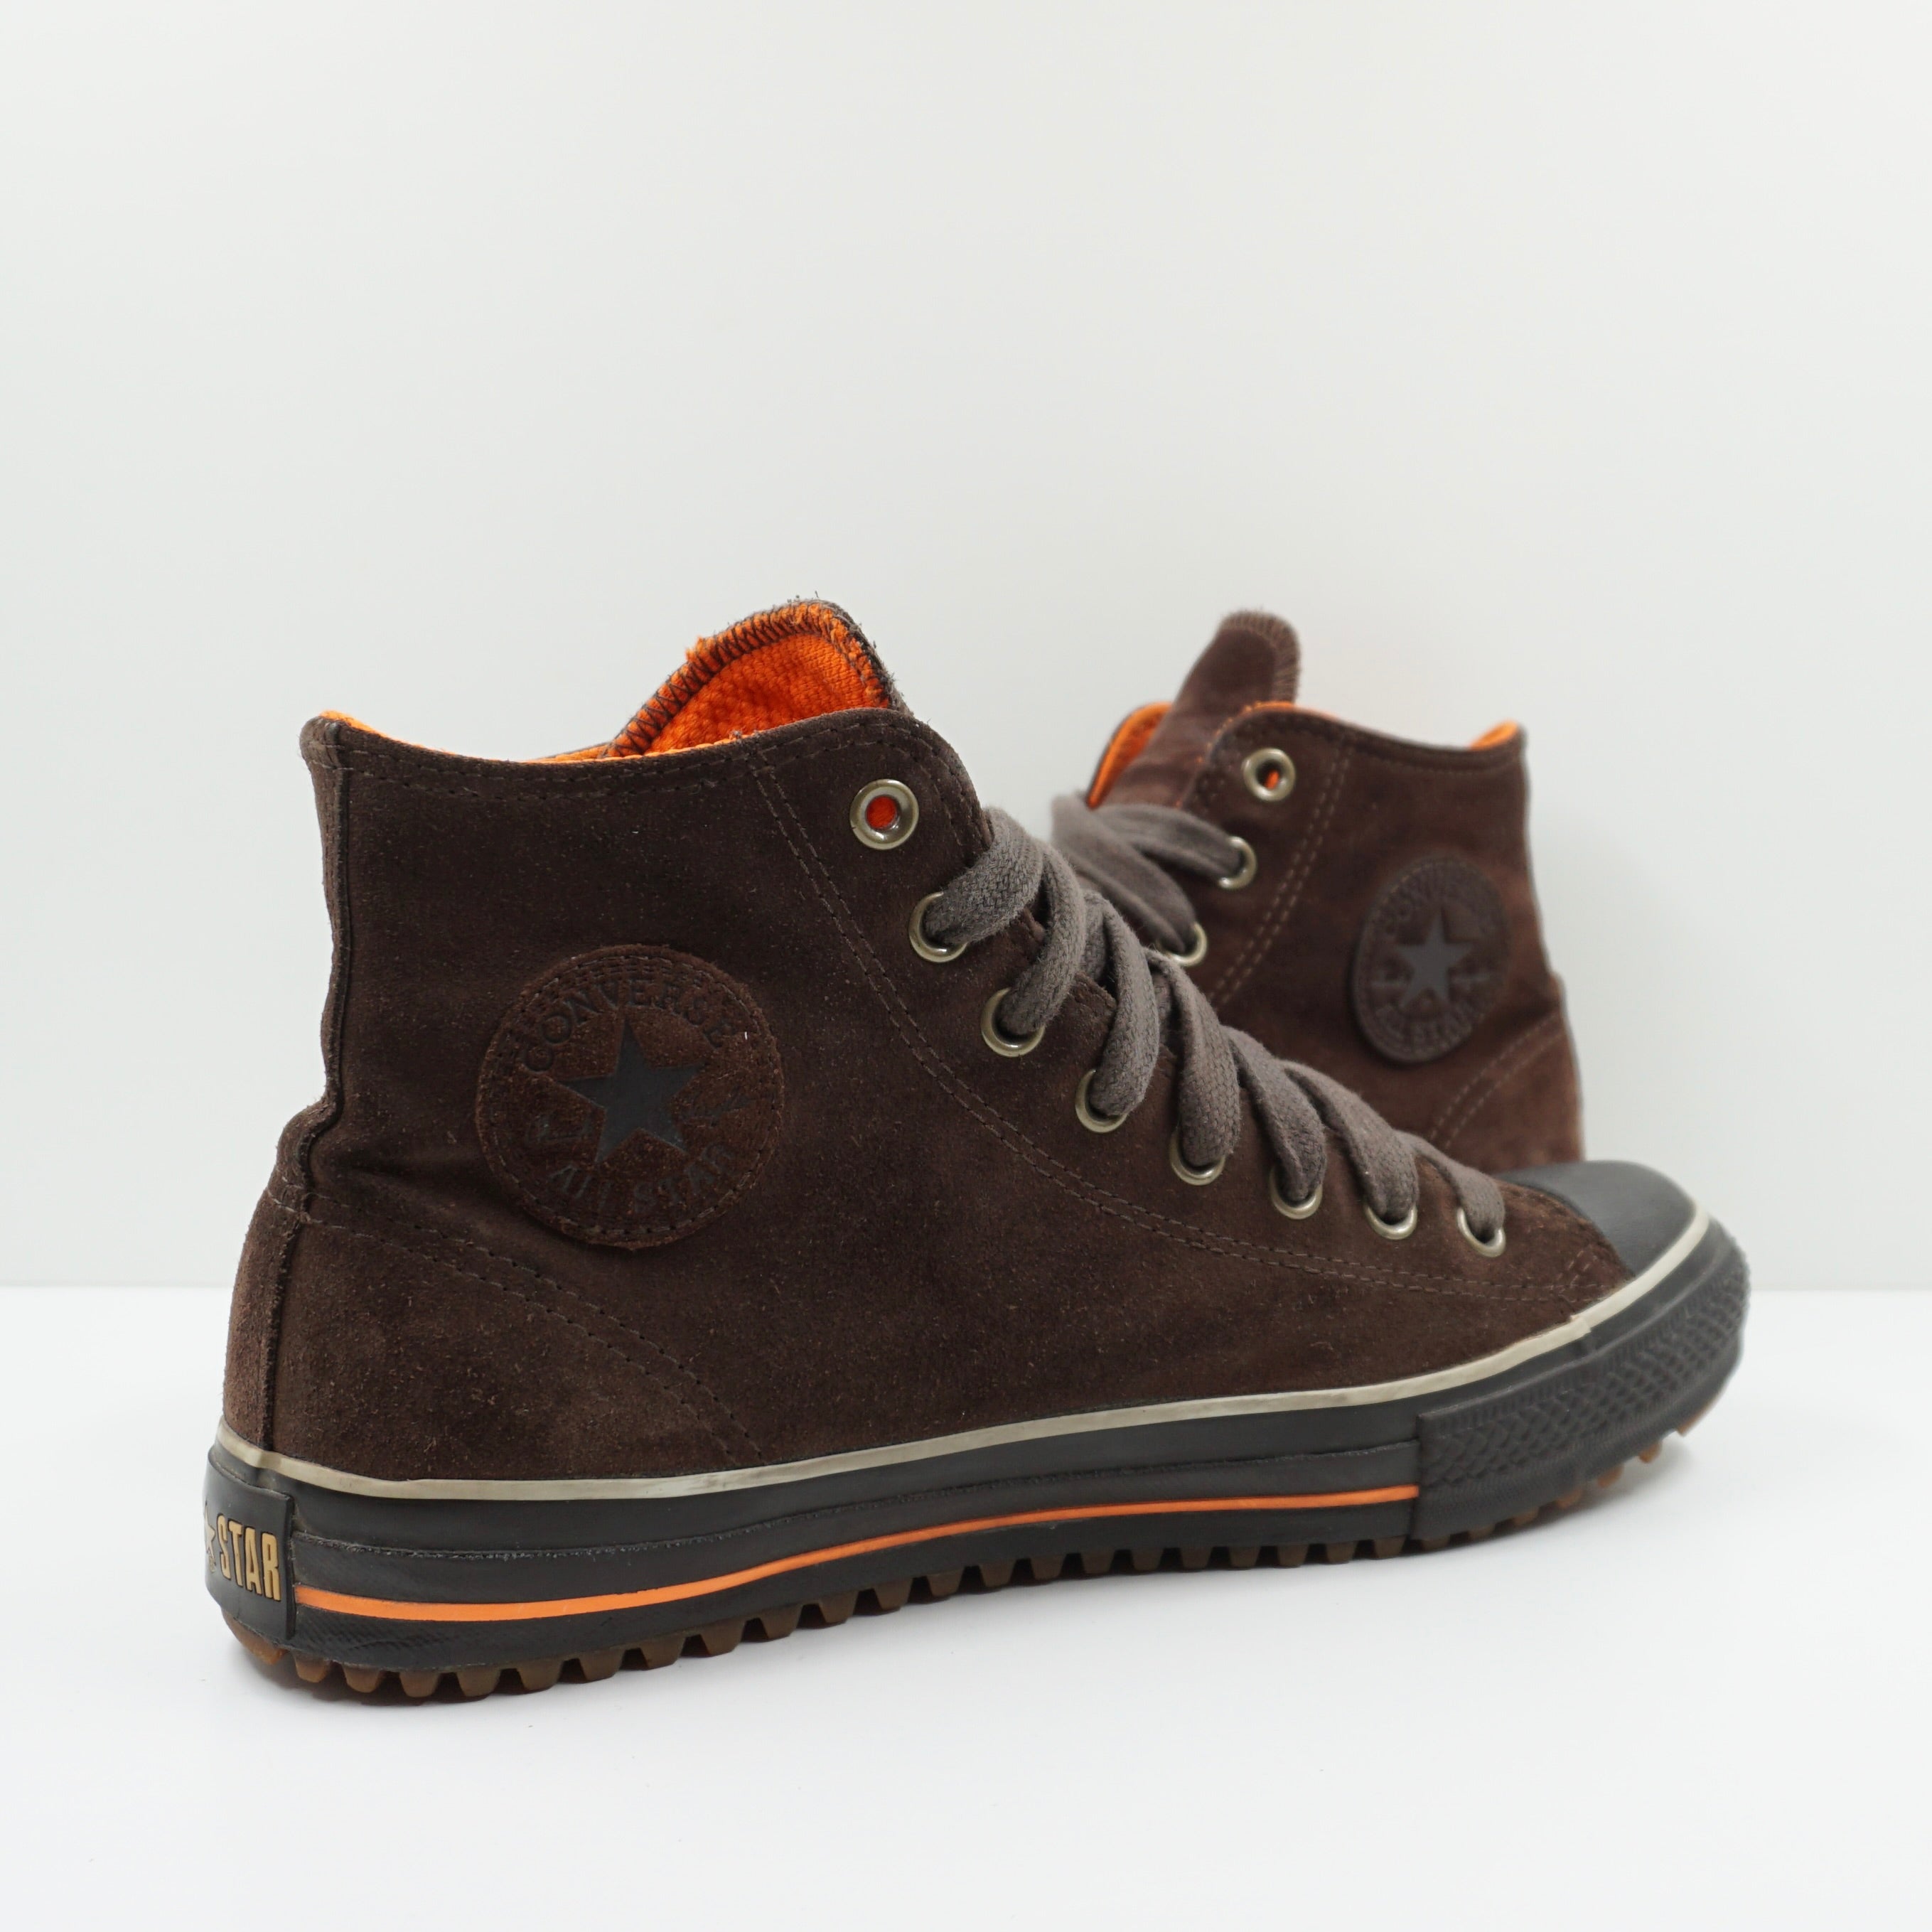 Converse Chuck Taylor All Star Winterized Mid Brown Suede